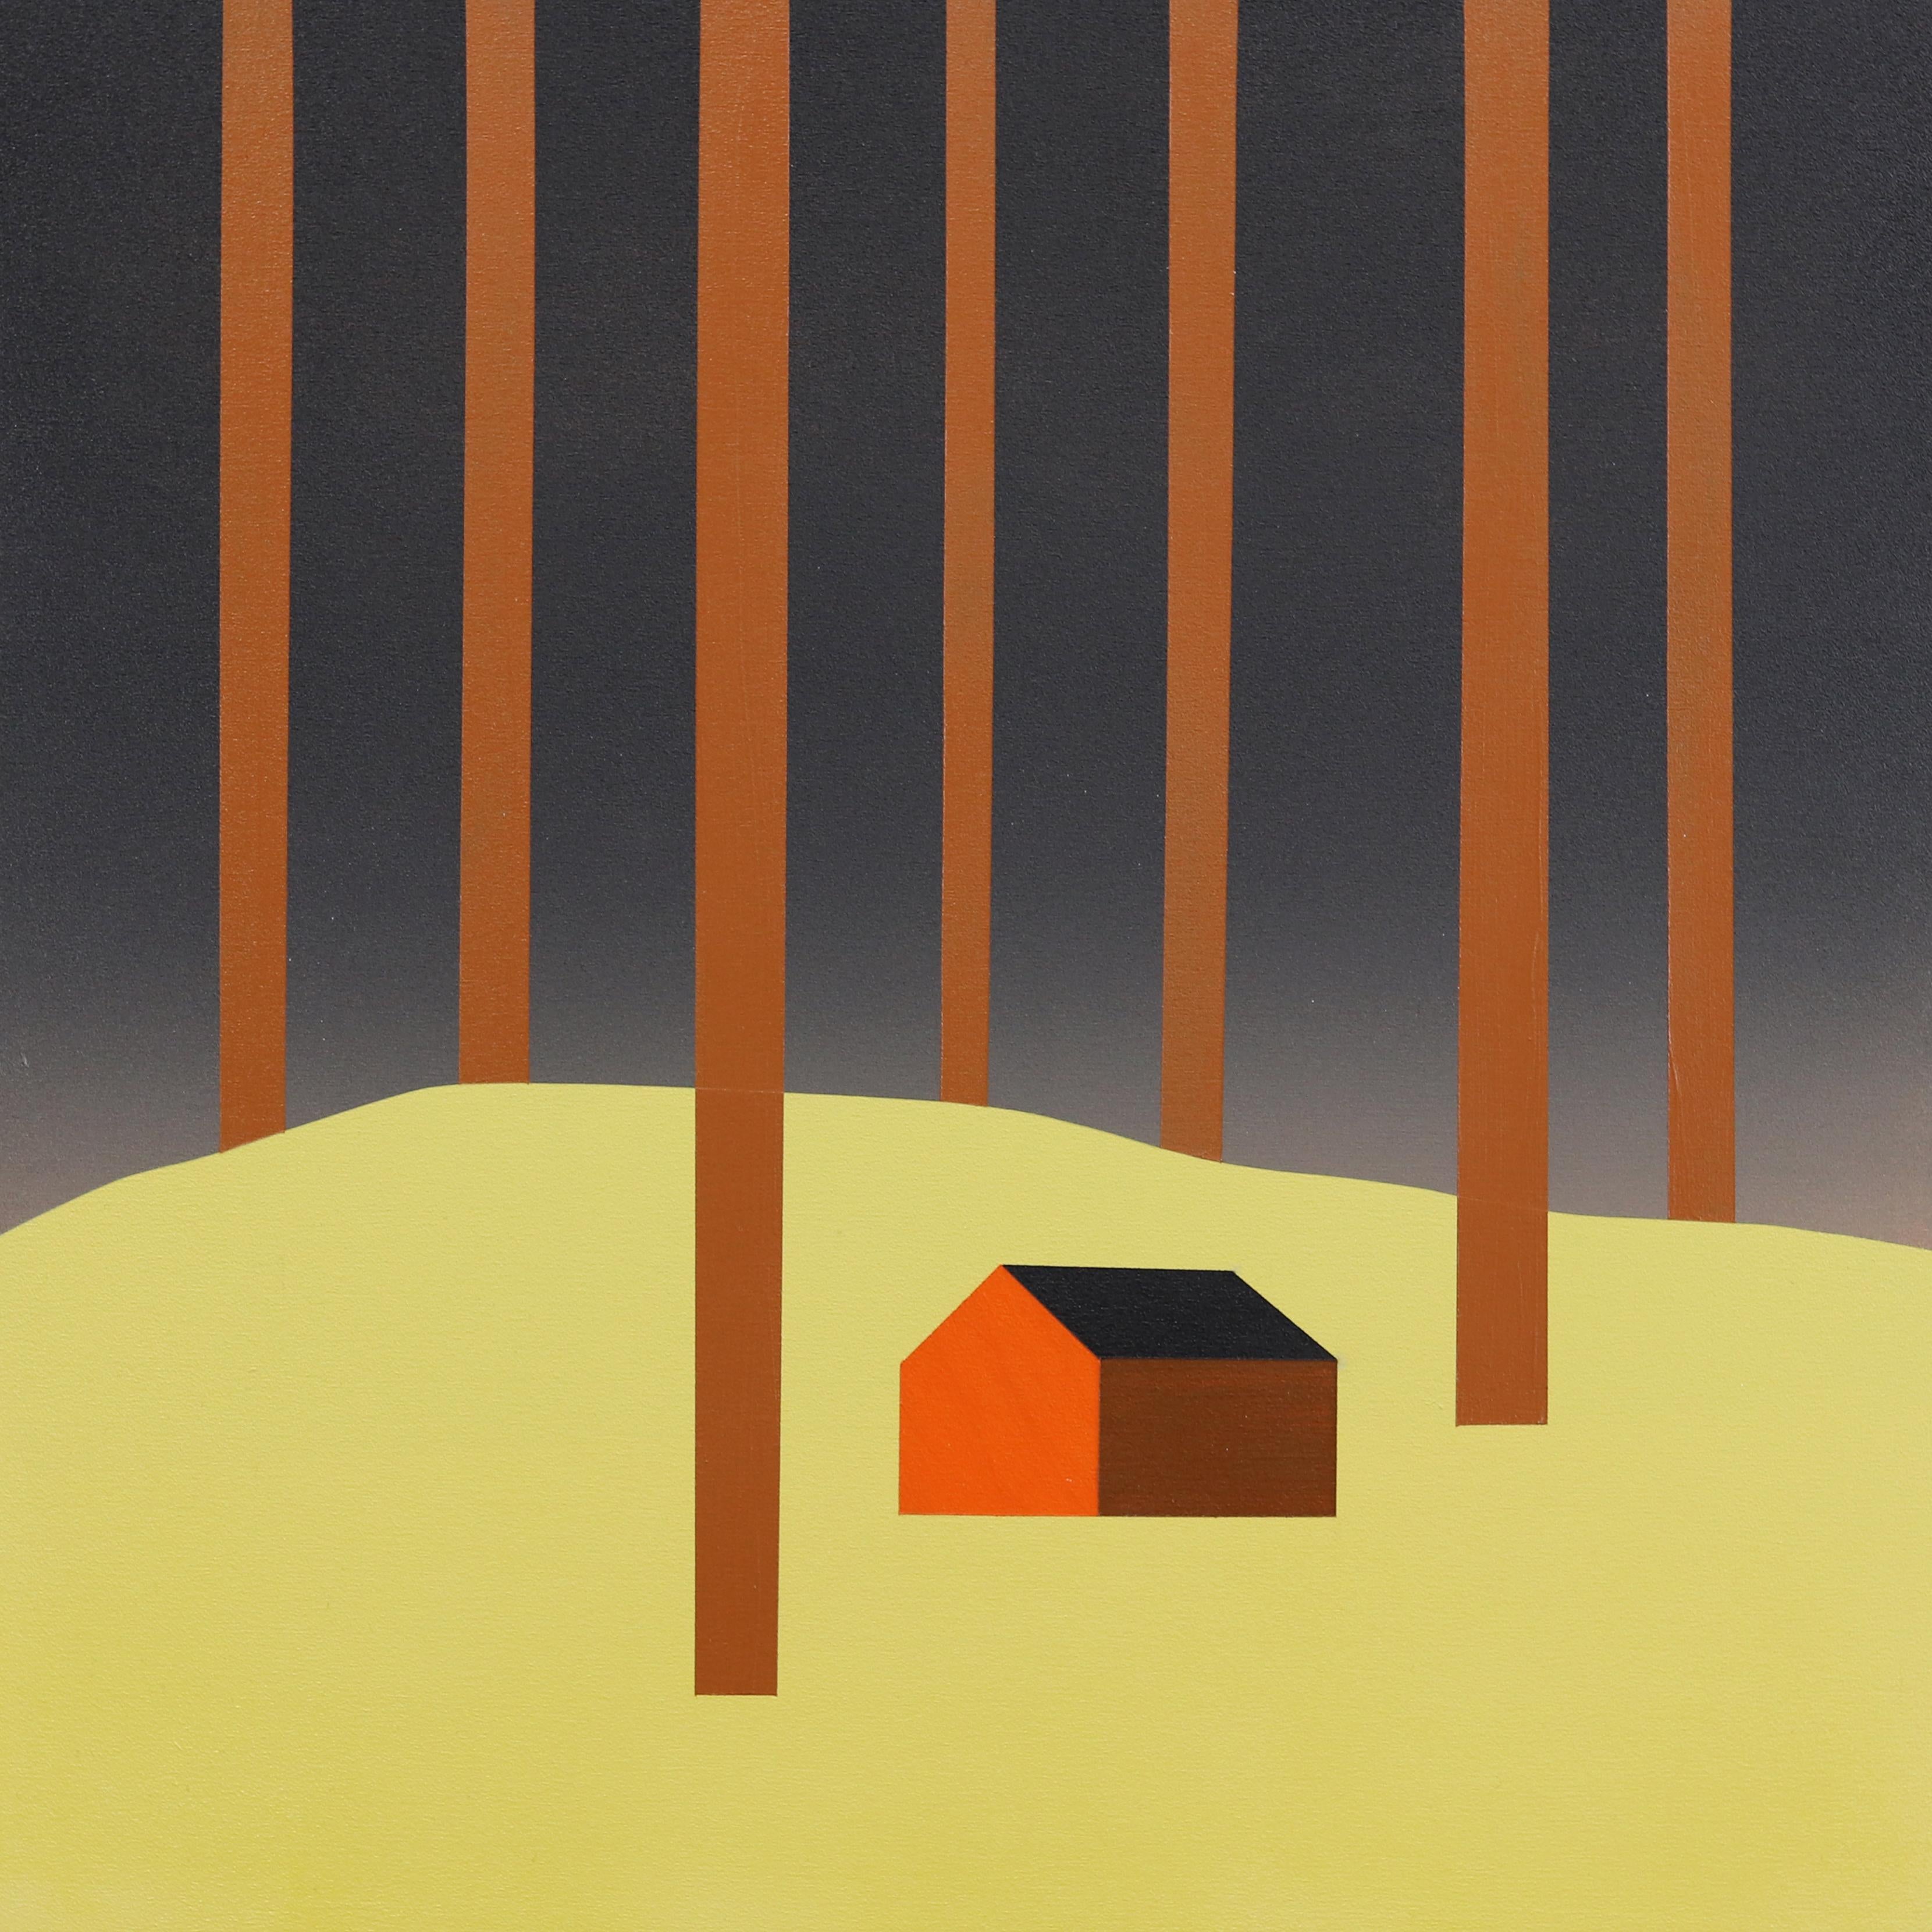 Cabin in September  -  Minimalist Figurative Landscape Painting  - Mixed Media Art by Mike Gough